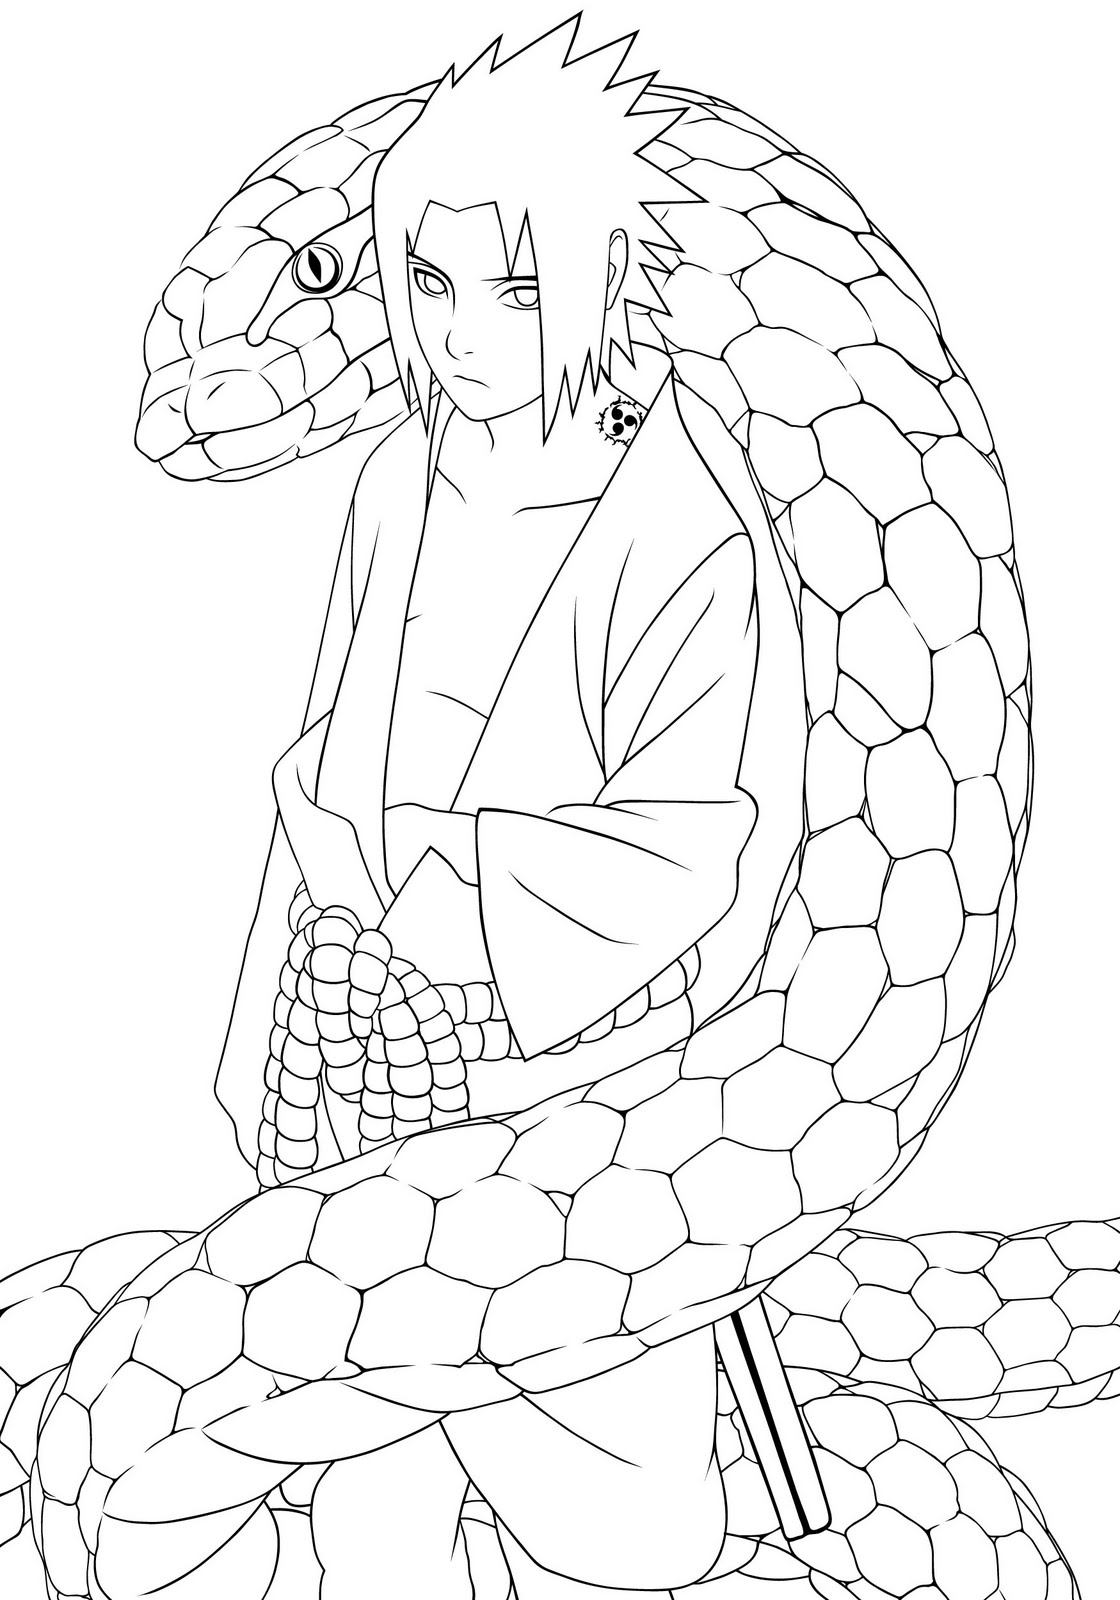 Anime Sasuke Coloring Pages | Download wallpapers page